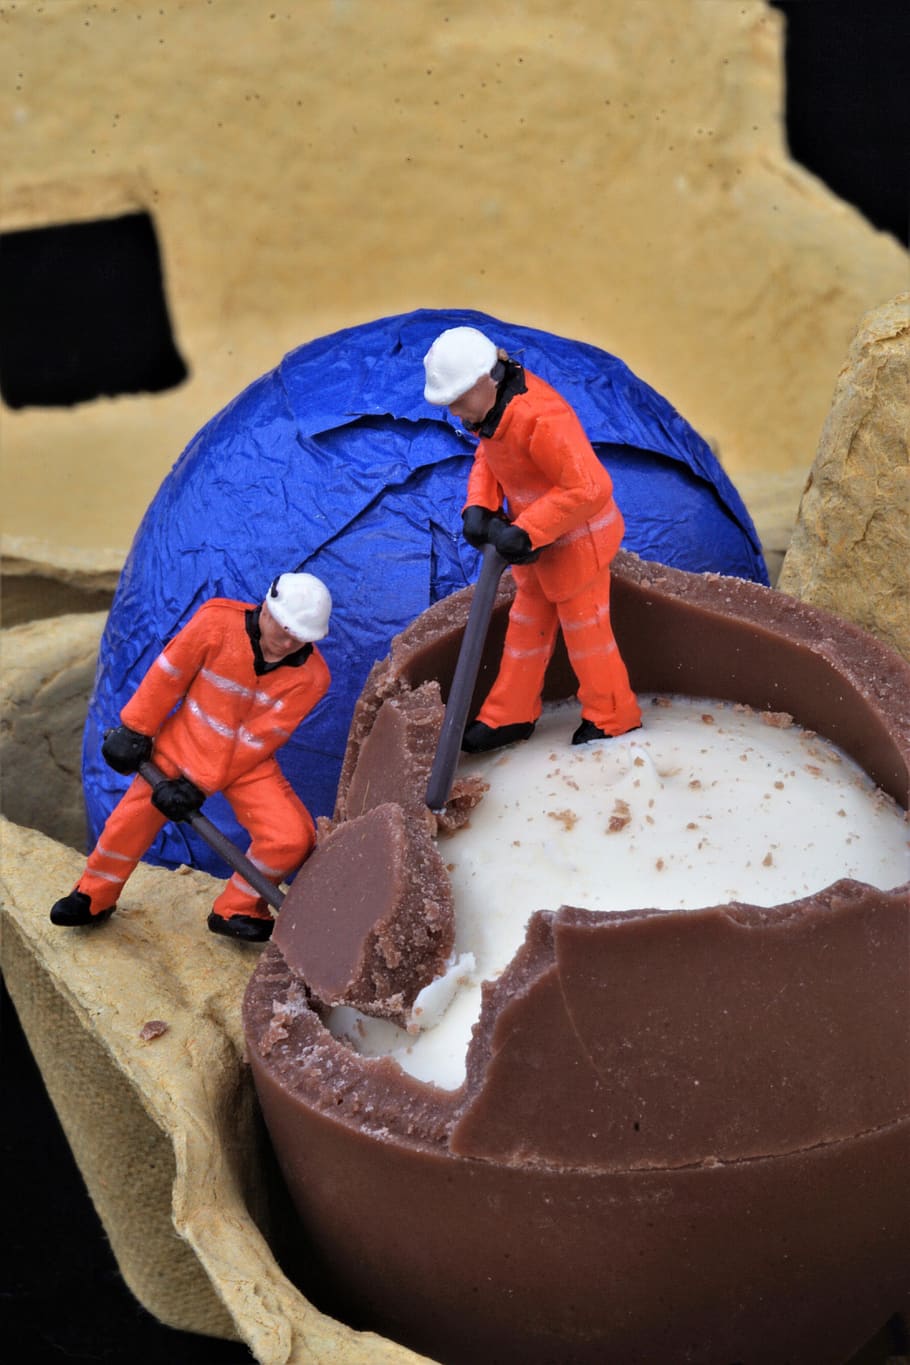 miniature, people, worker, two, hard hat overalls, easter, eggs cream, sweets working ho model, chocolate, miniature figure